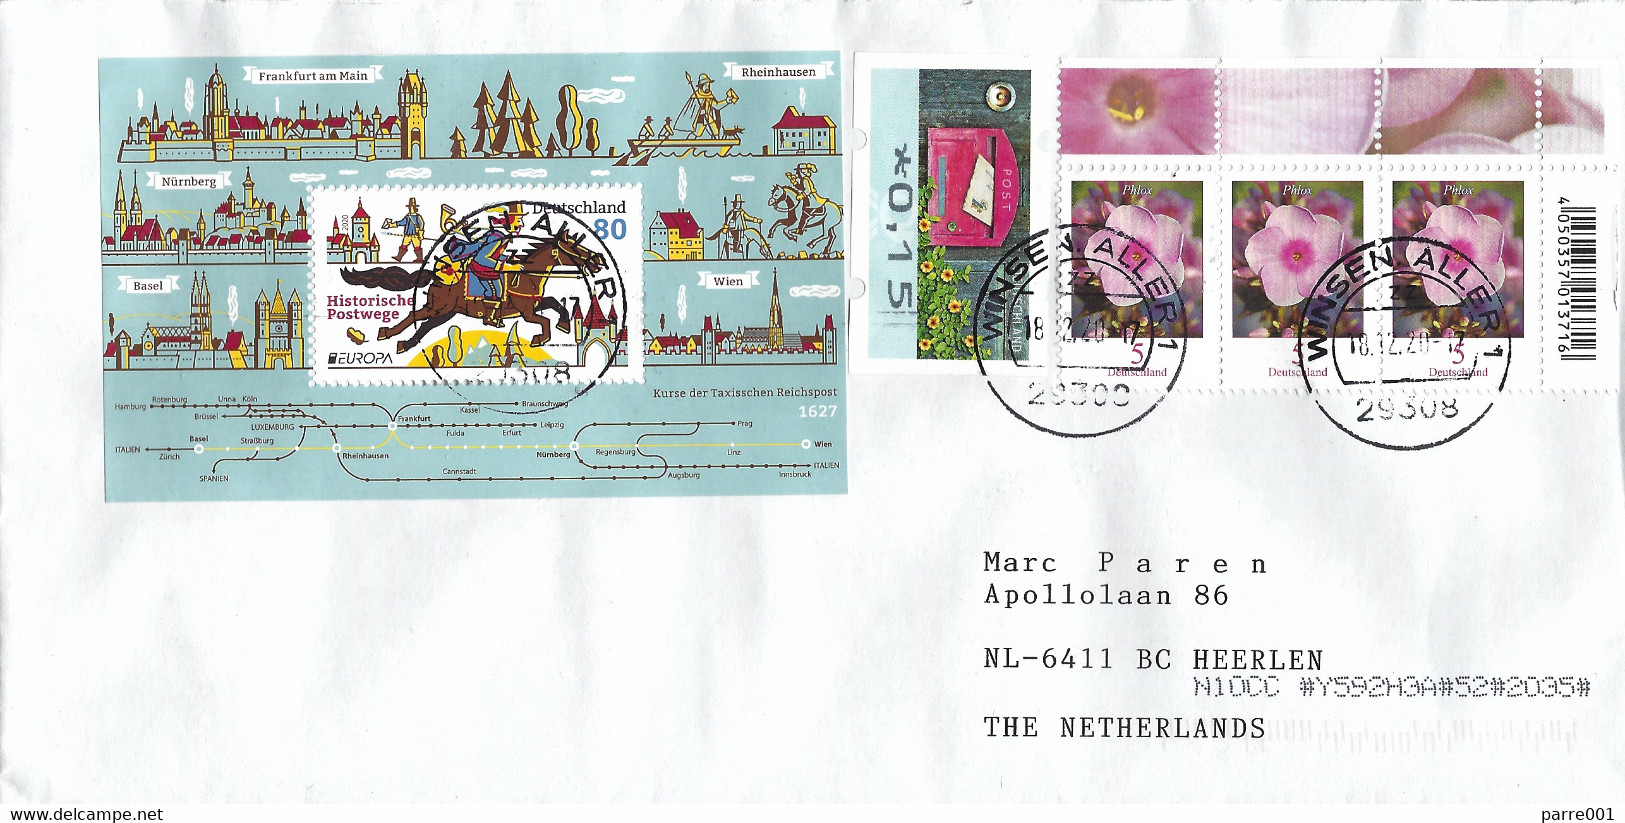 Germany 2020 Winsen EUROPA CEPT Postal Routes ATM Phlox Flower Cover - 2020